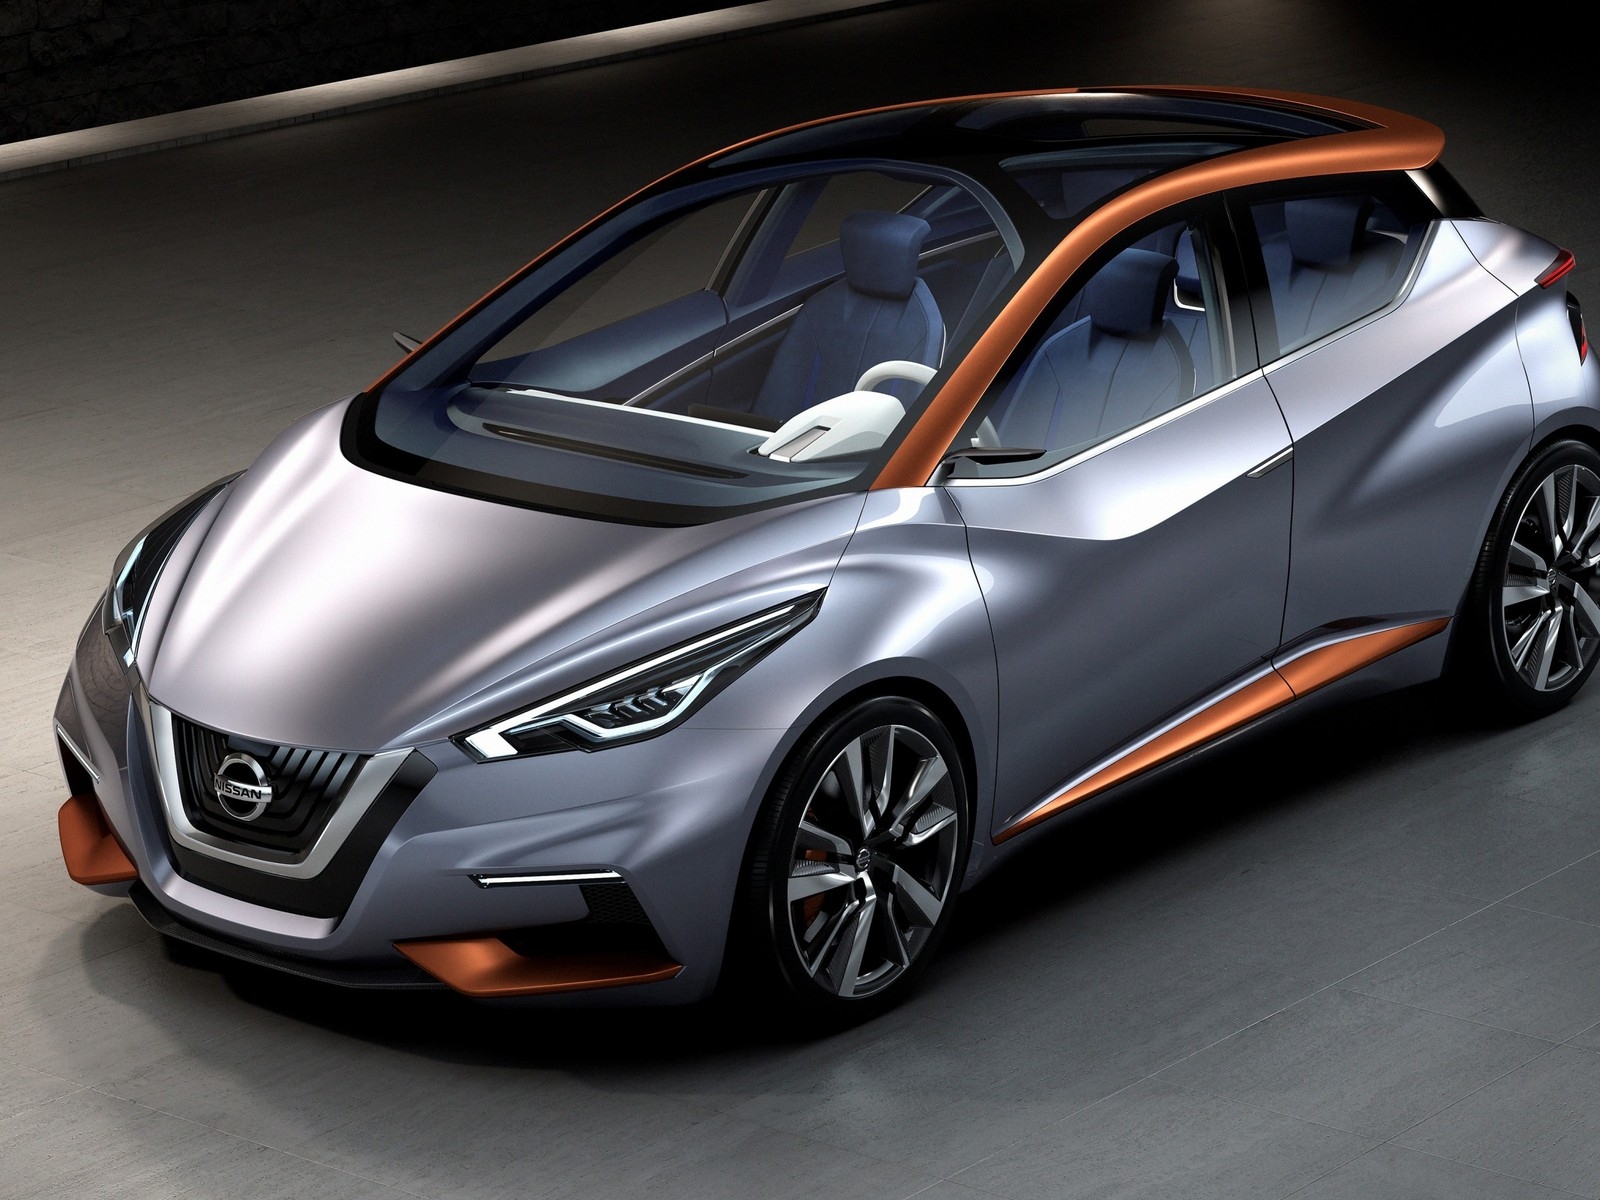 2015 Nissan Sway Concept for 1600 x 1200 resolution